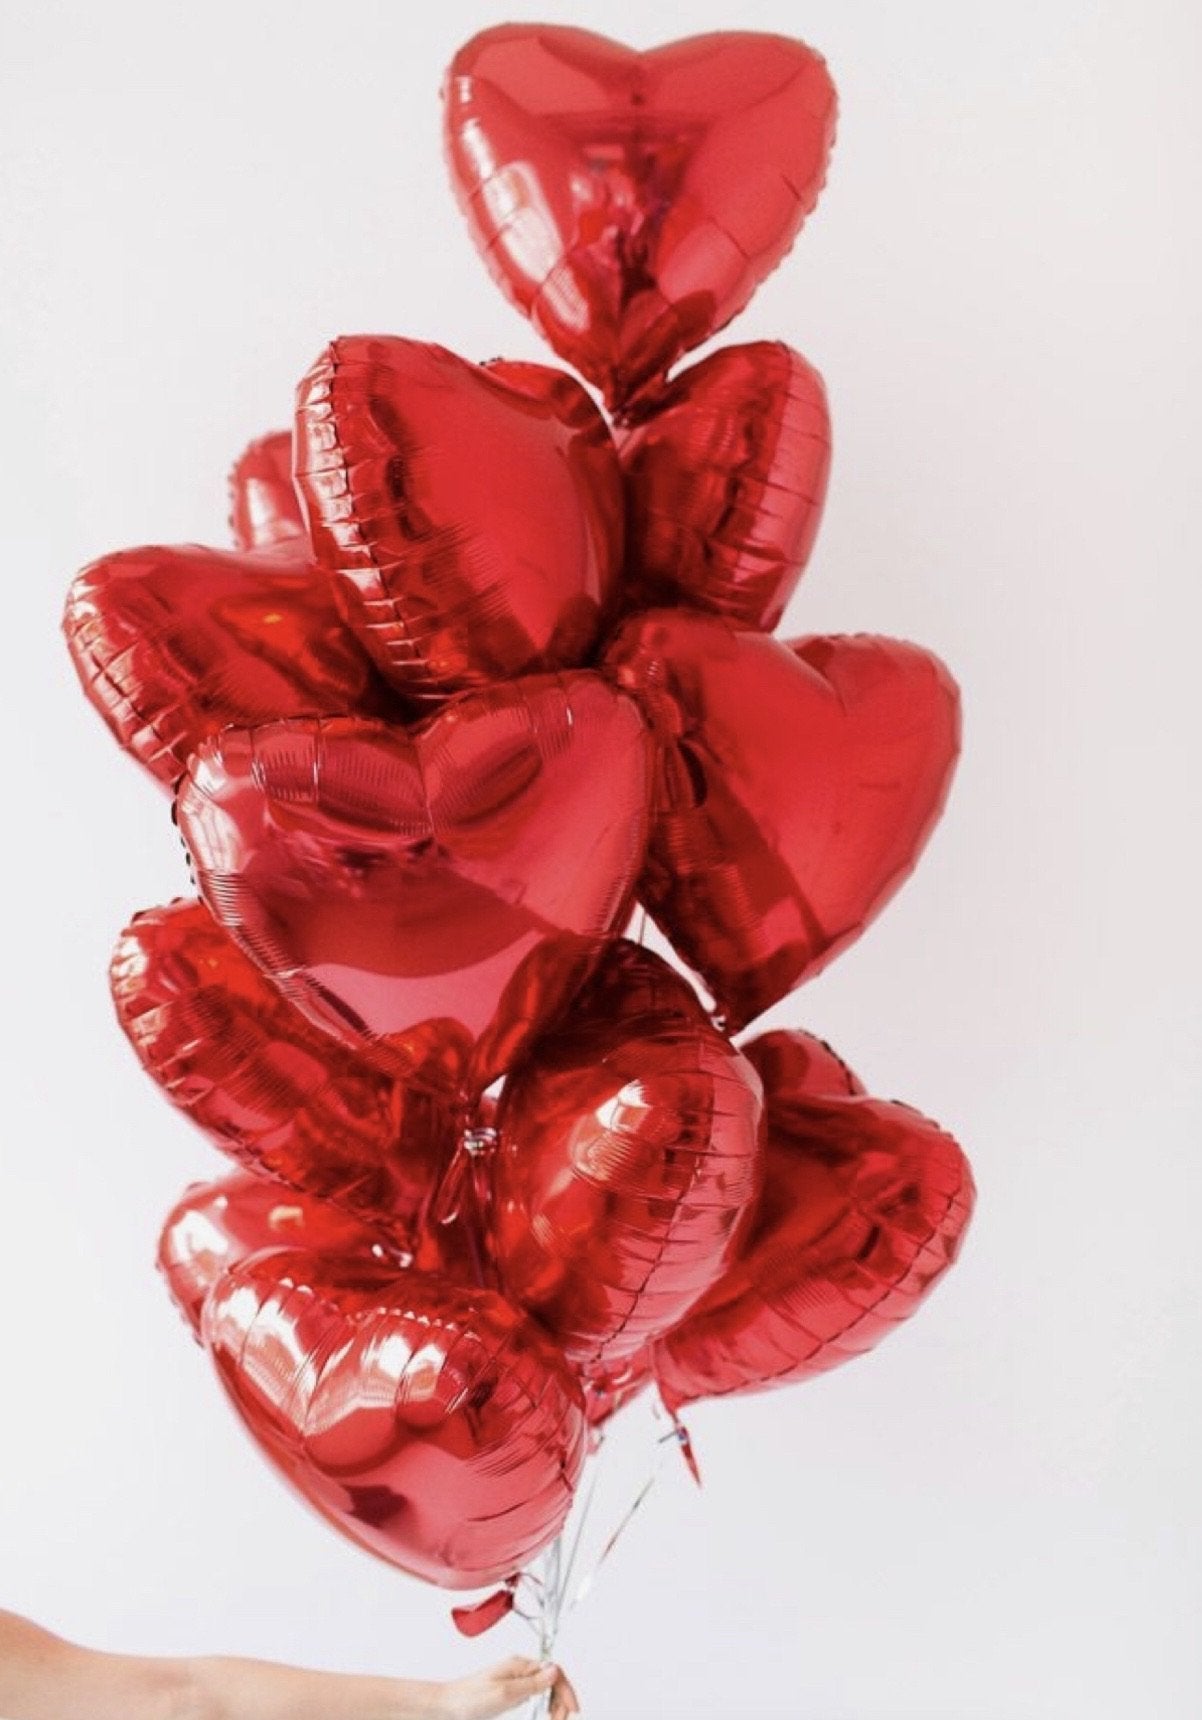 10 red Balloons - hearts with helium